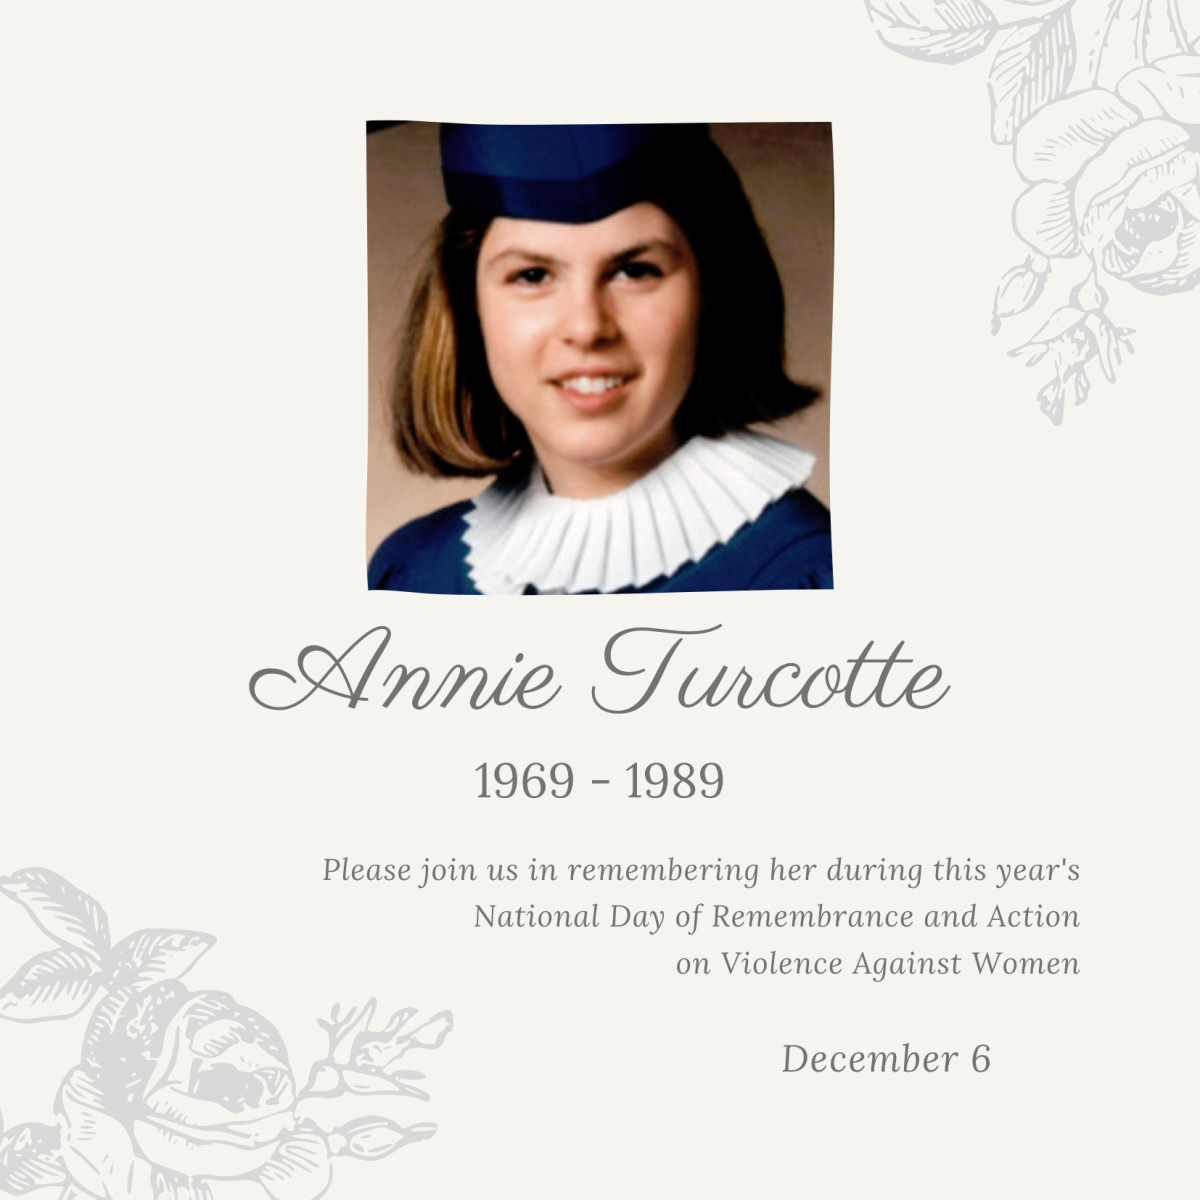 Anne Turcotte. 1969 to 1989.